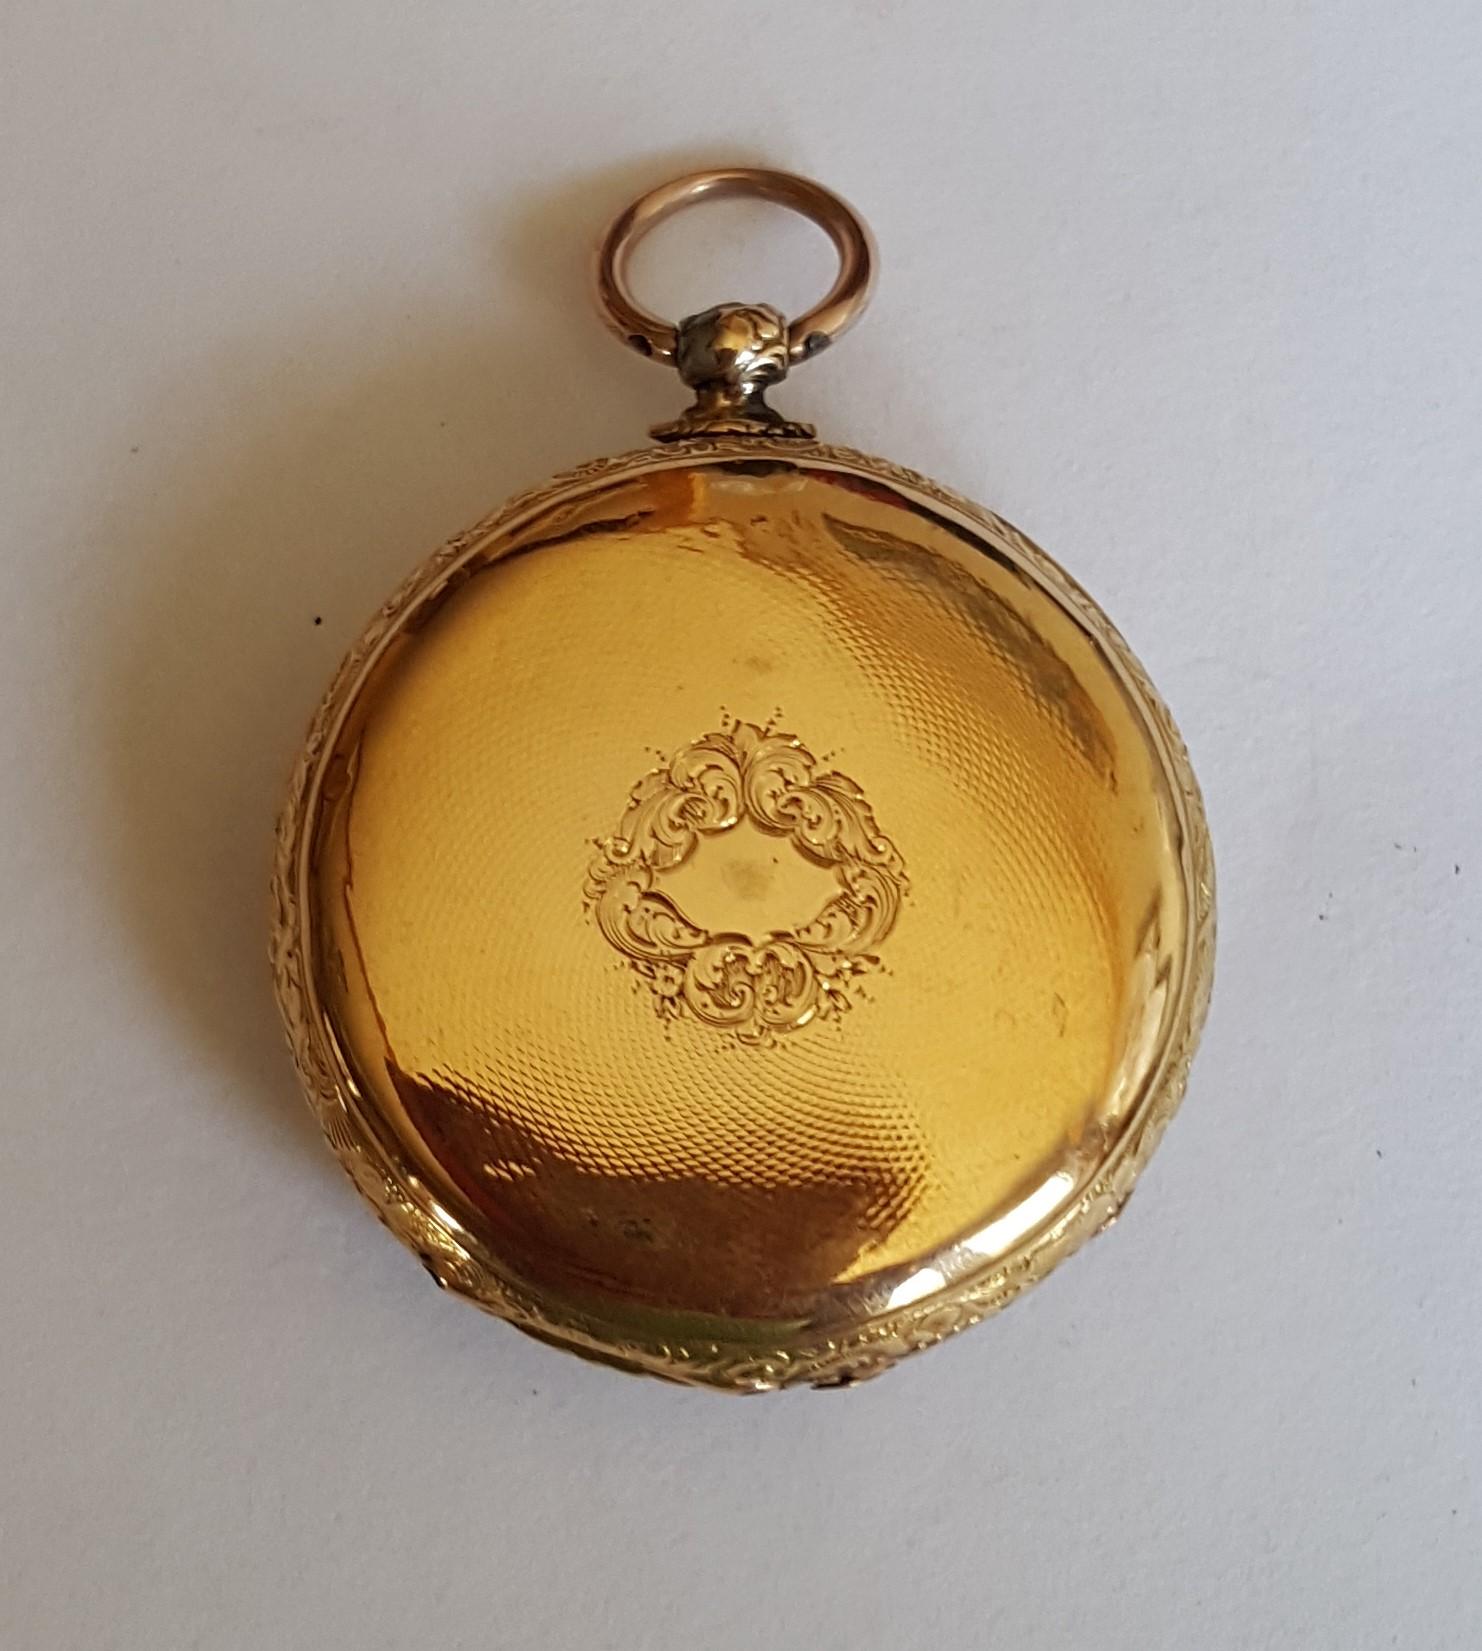 18kt Yellow Gold Vintage Early 19th Century Gold Pocket Watch. Key Wind and It's Working! 40mm Case, Guilloche Face, accented with an image of a castle with a bridge over water. Roman Numerals, Very good Condition, small dents on the back case. The